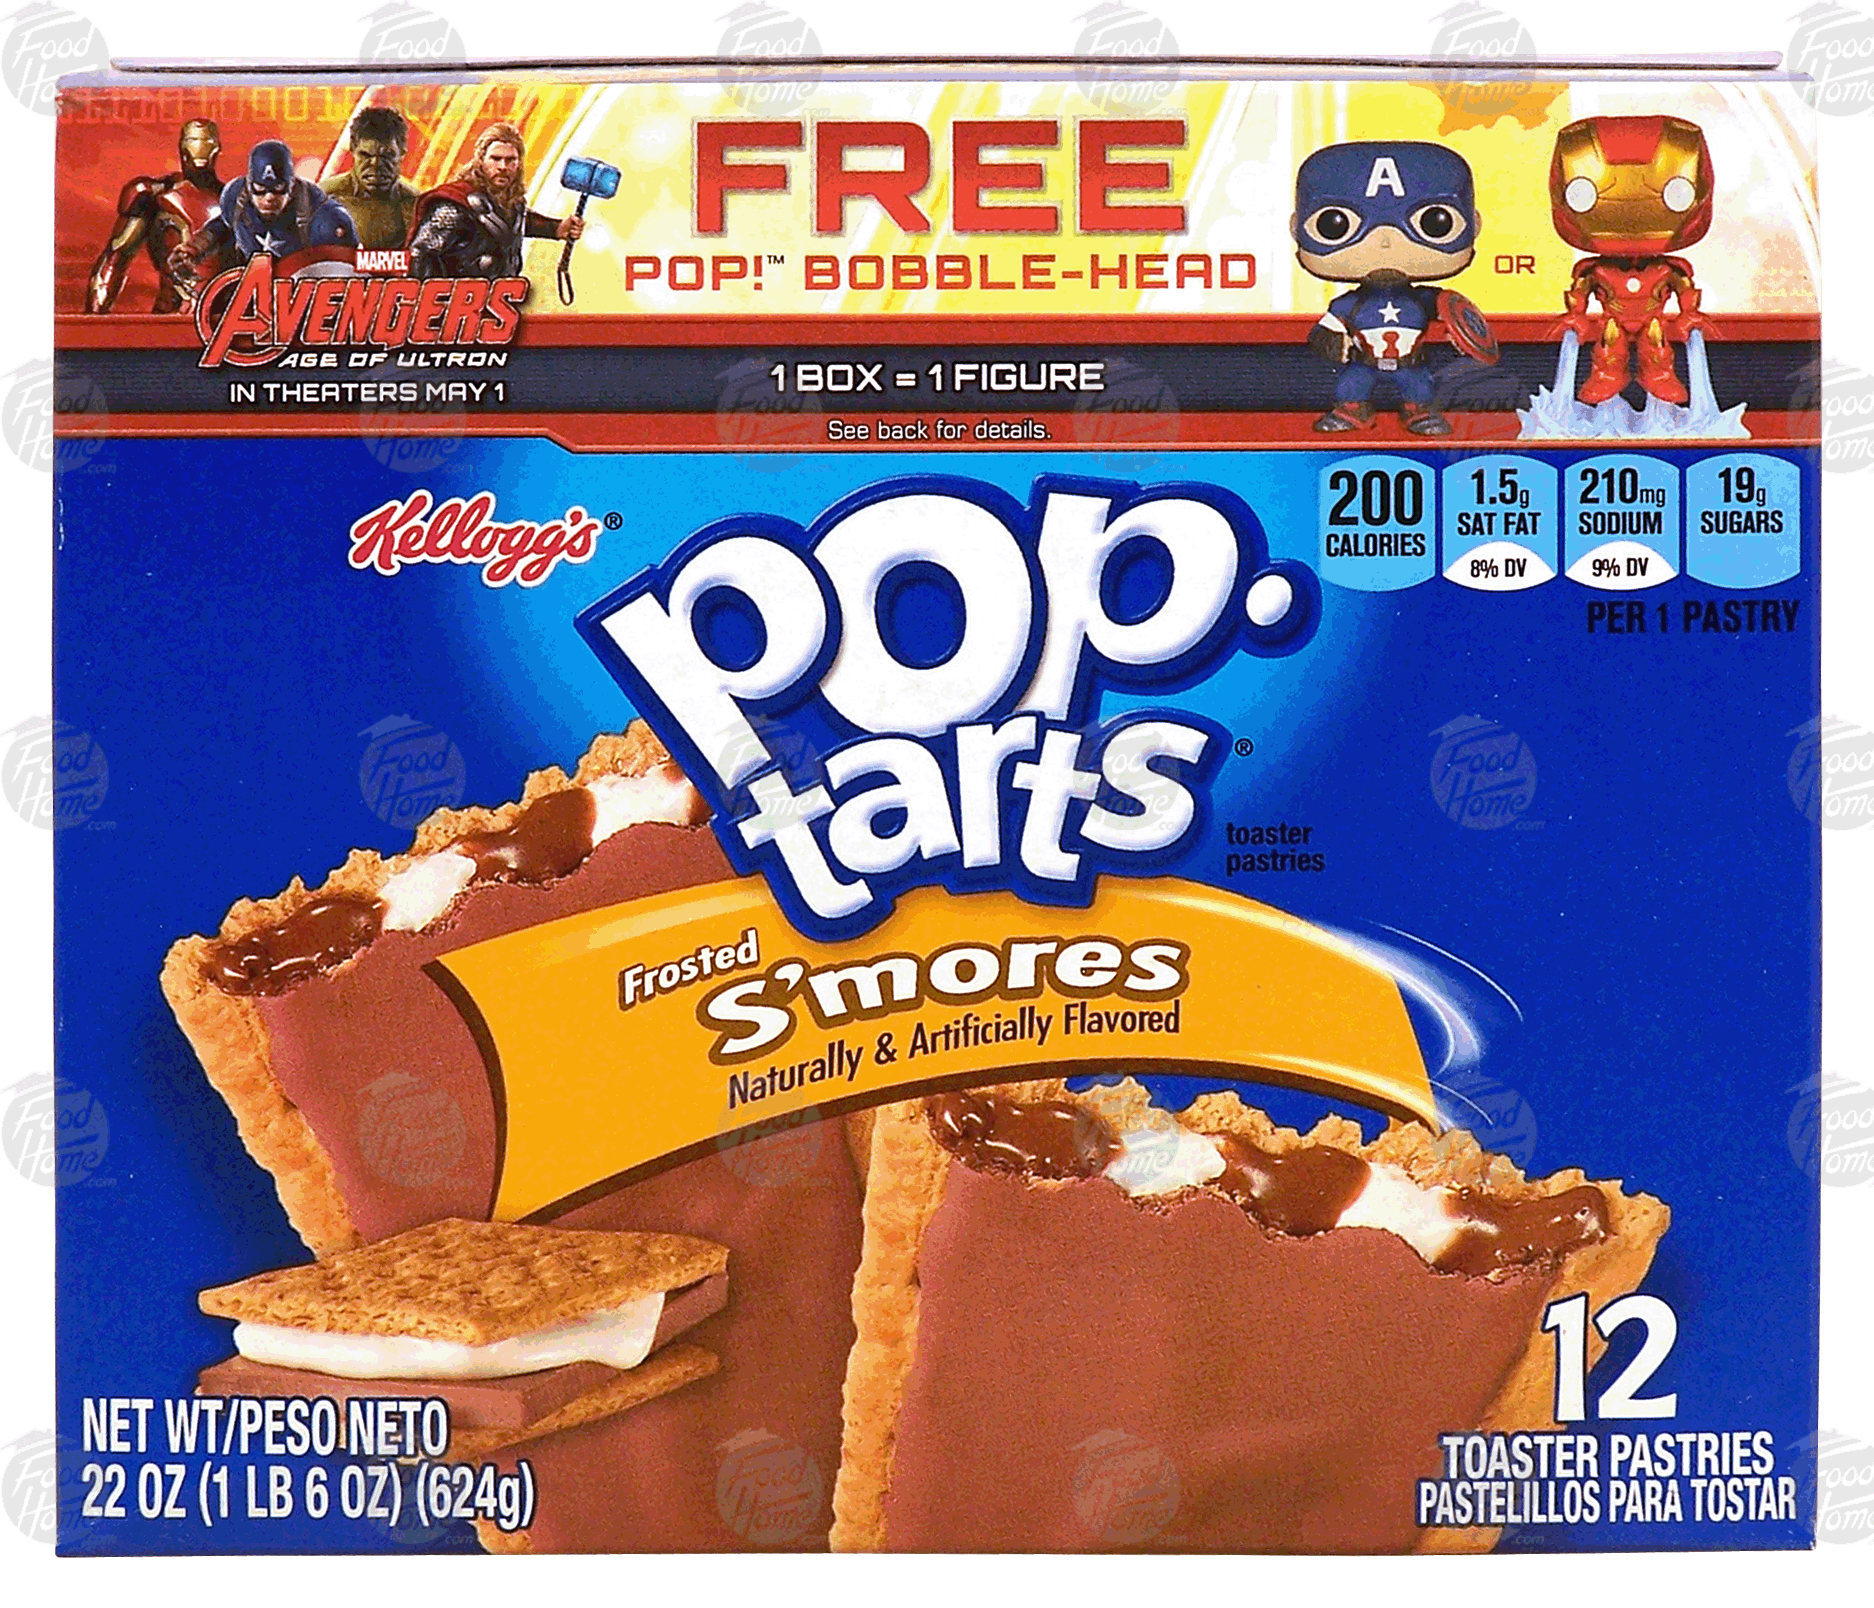 Kellogg's Pop-tarts s'mores toaster pastries, 12-count family pack Full-Size Picture